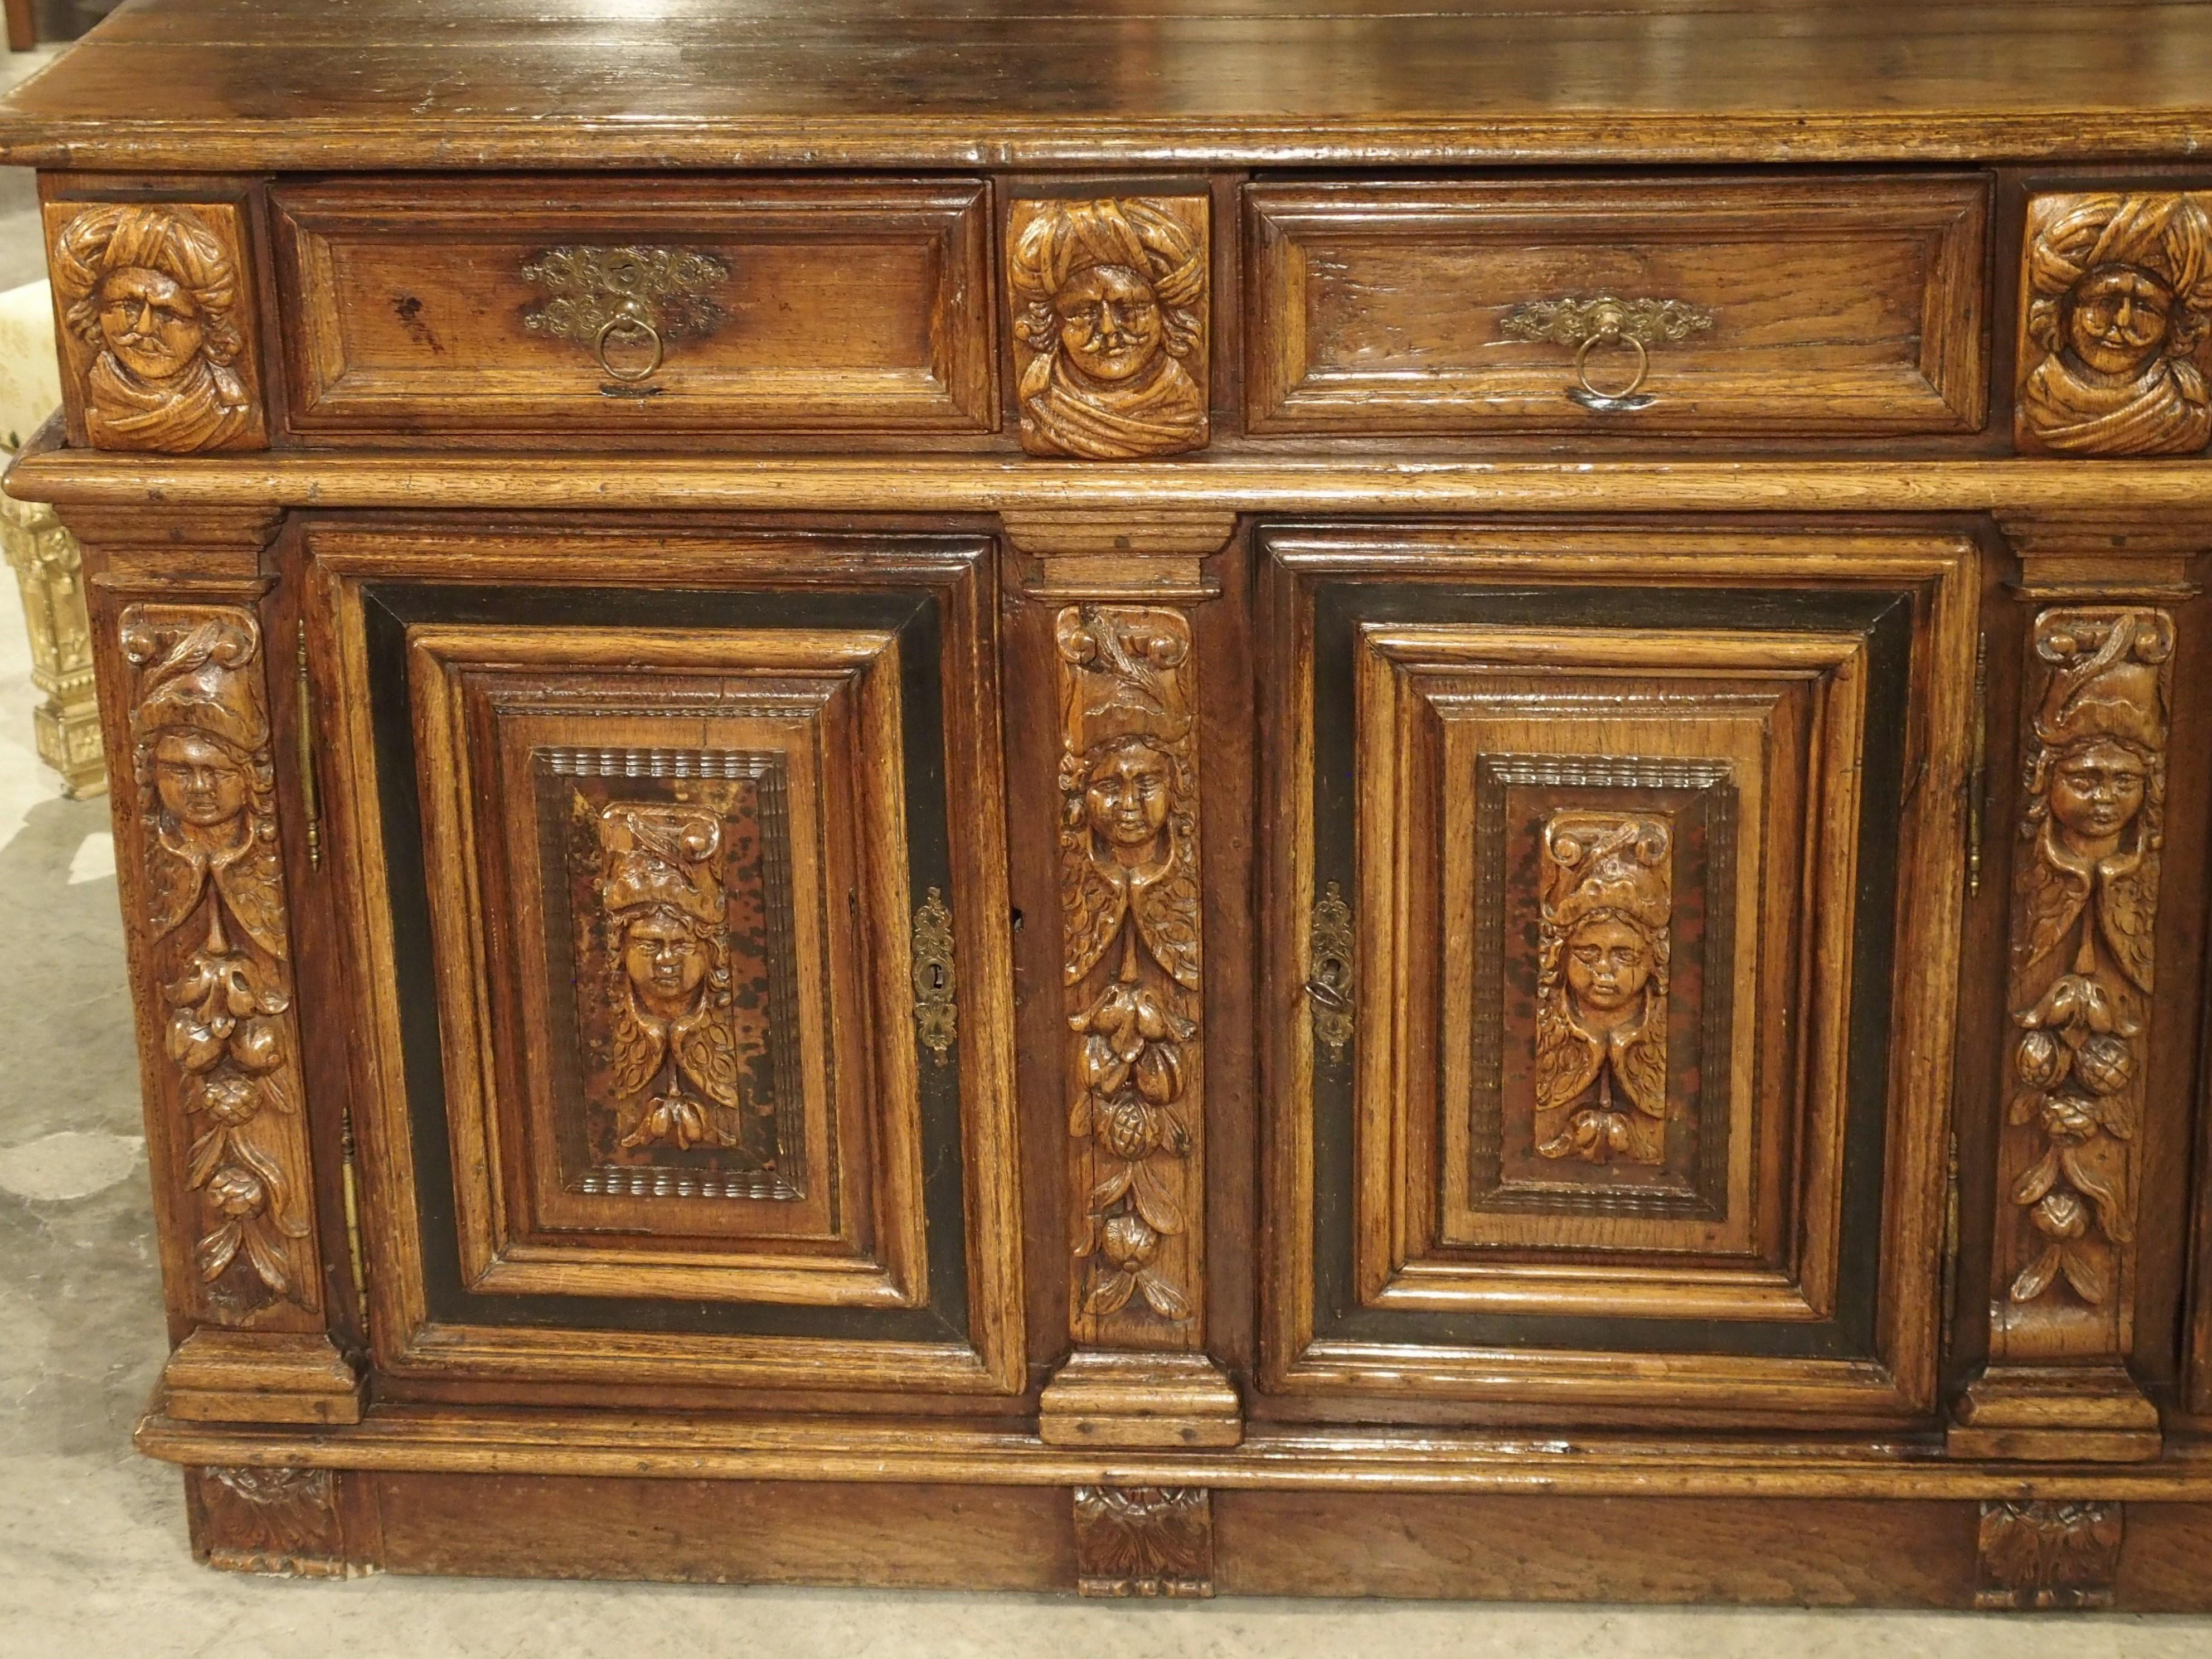 This beautiful and rare three door enfilade buffet comes from northern Europe, most likely the Netherlands or Flanders. This type of furniture can also be called a Dresche. Along the back of the top, is a thin groove for displaying fine plates